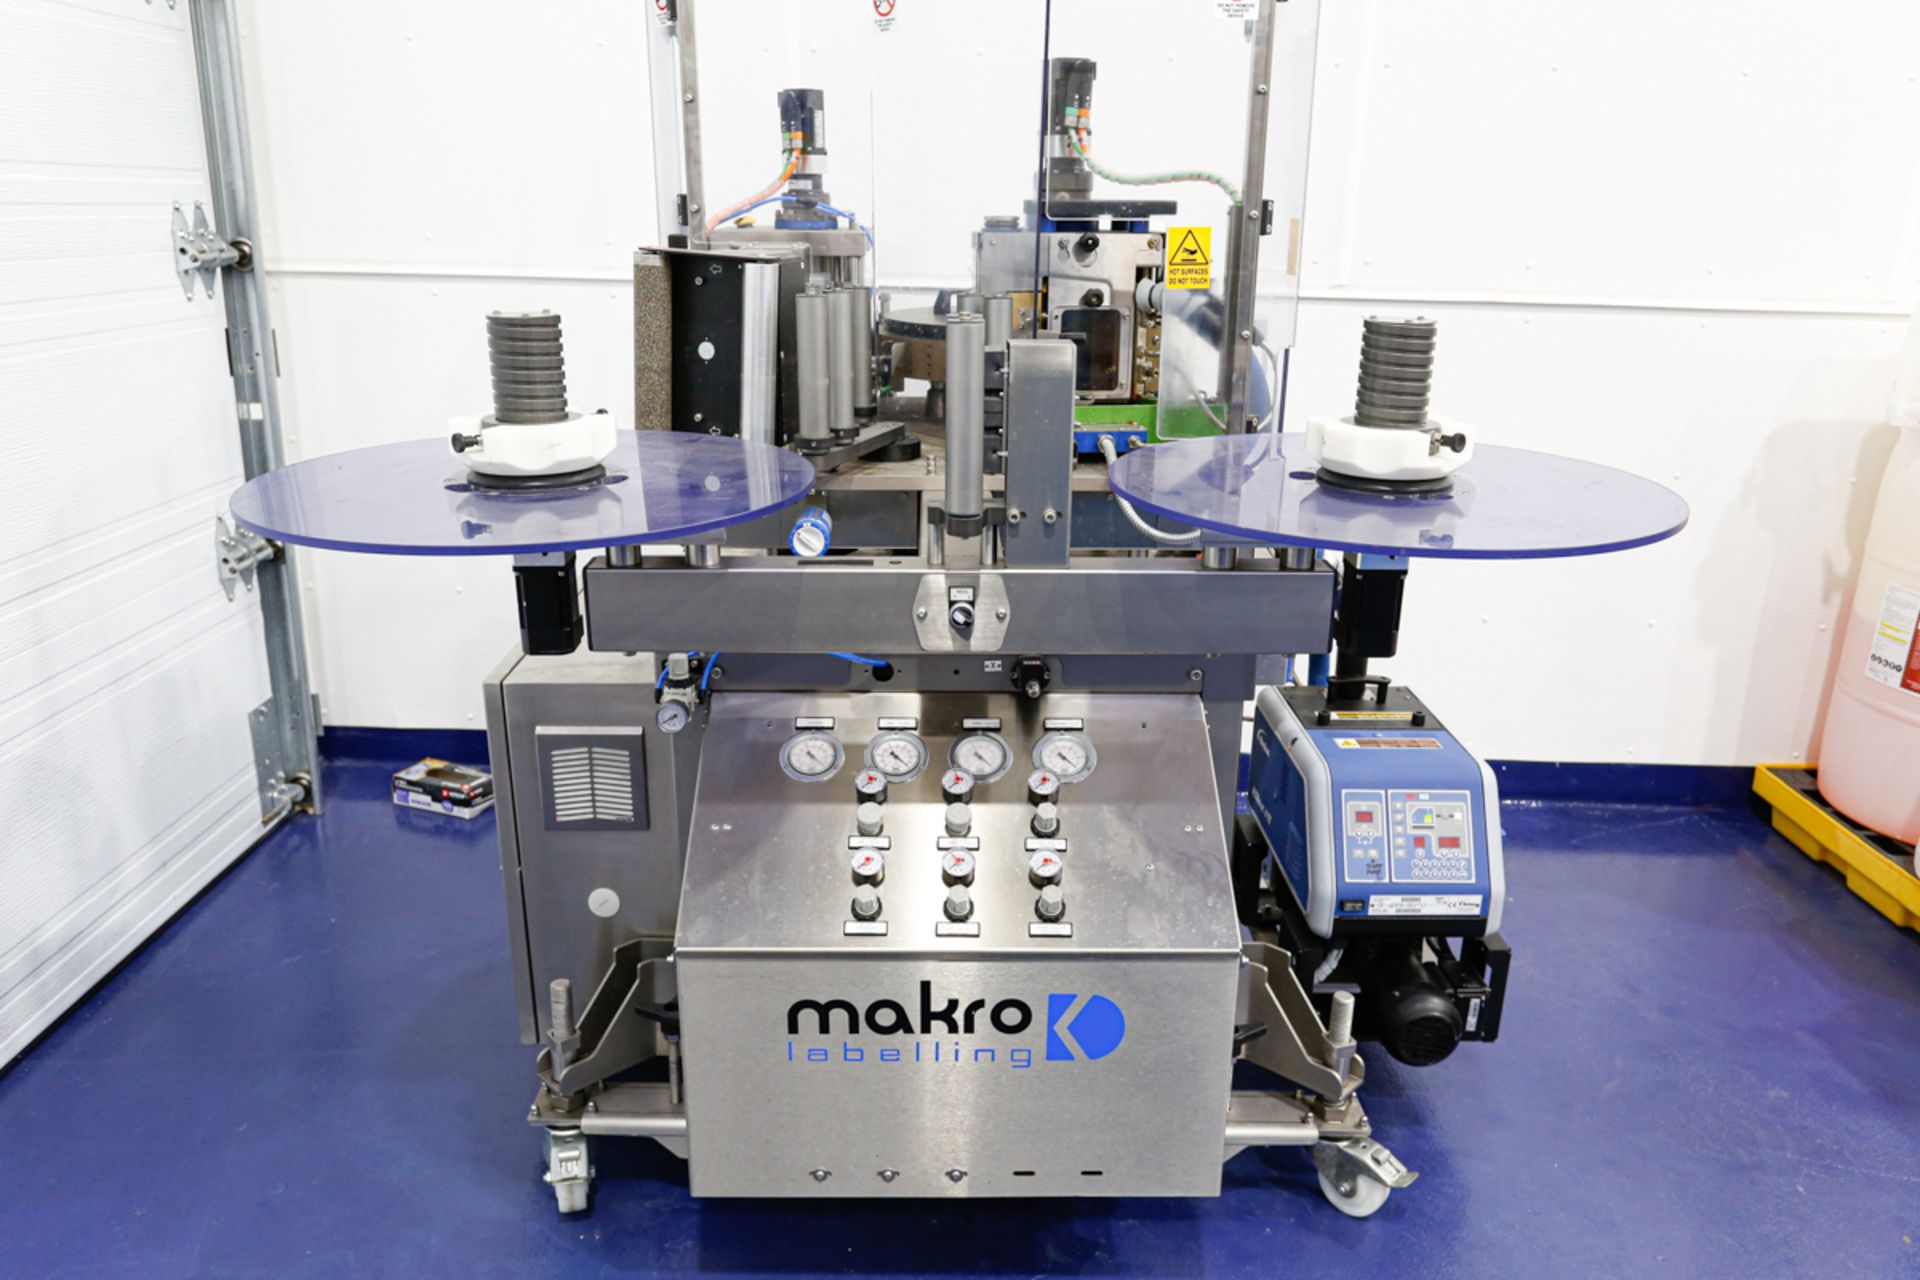 (2017) MAKRO LABELLING Model RLF, Roll Feed Labelling Machine, with NORDSON AltaBlue 4TT 4 Litre Hot